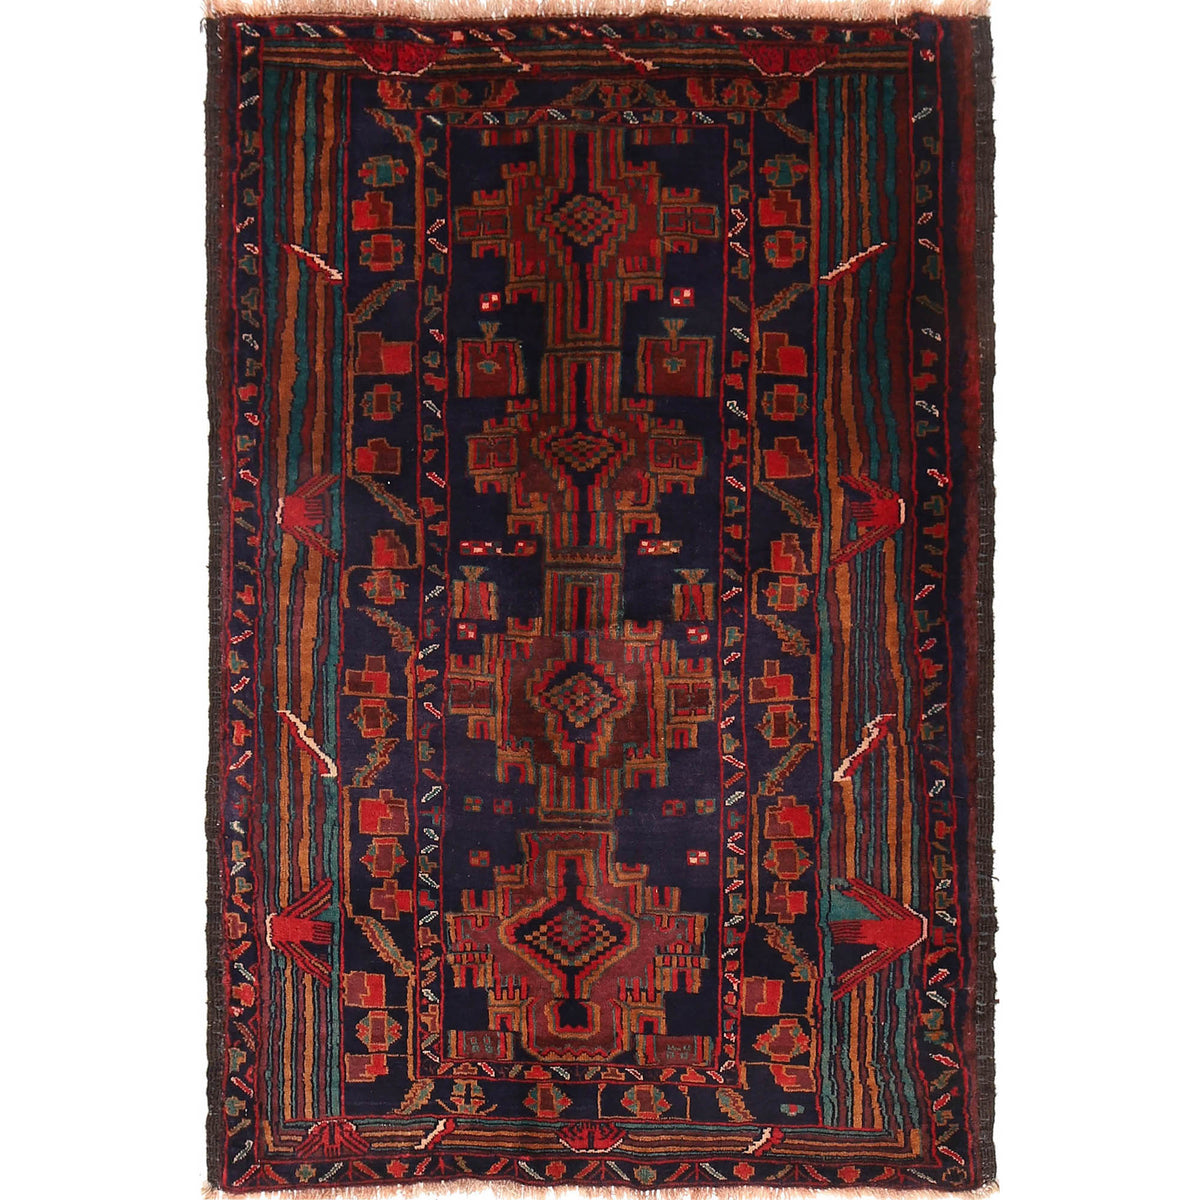 Shop for the latest Baluchi Rug 3'3 x 4'9 (ft) / 101 x 150 (cm